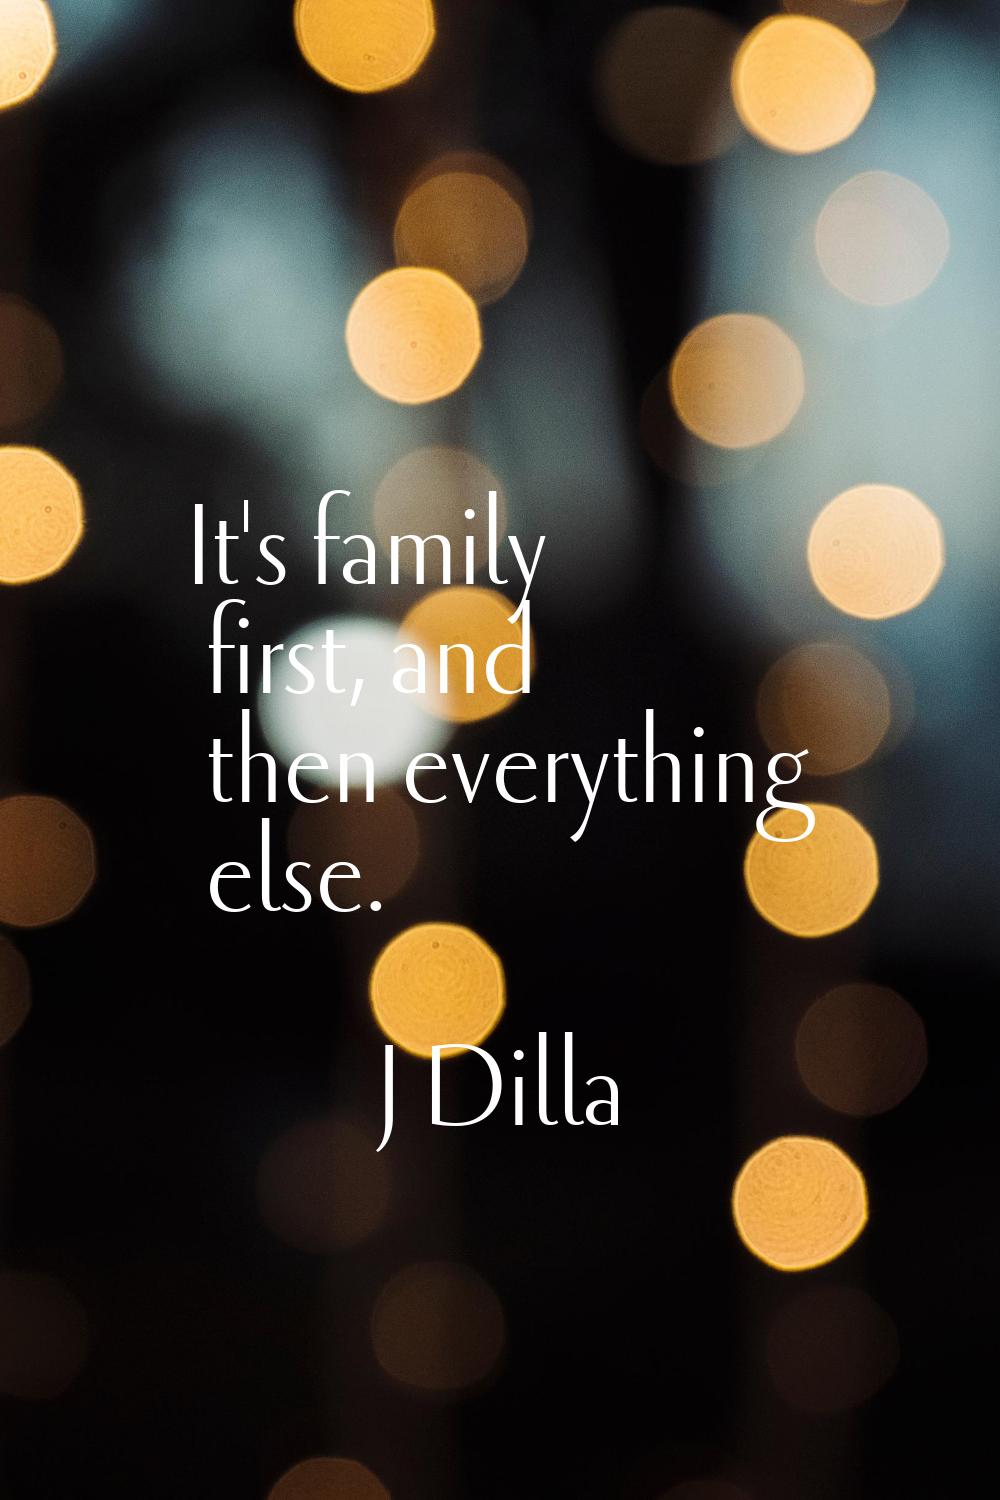 It's family first, and then everything else.